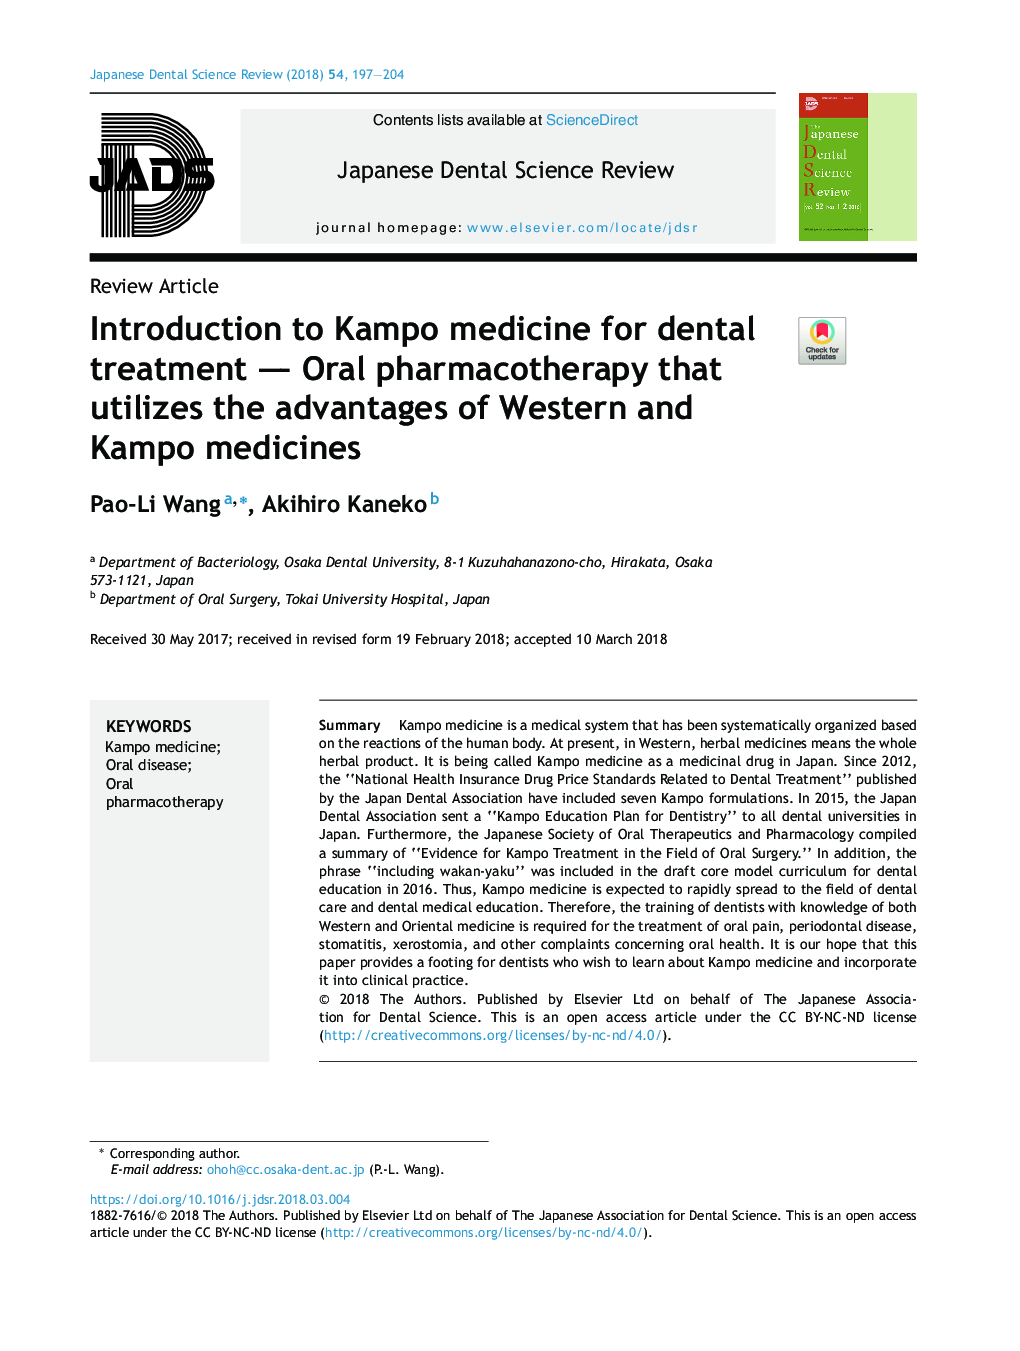 Introduction to Kampo medicine for dental treatment - Oral pharmacotherapy that utilizes the advantages of Western and Kampo medicines